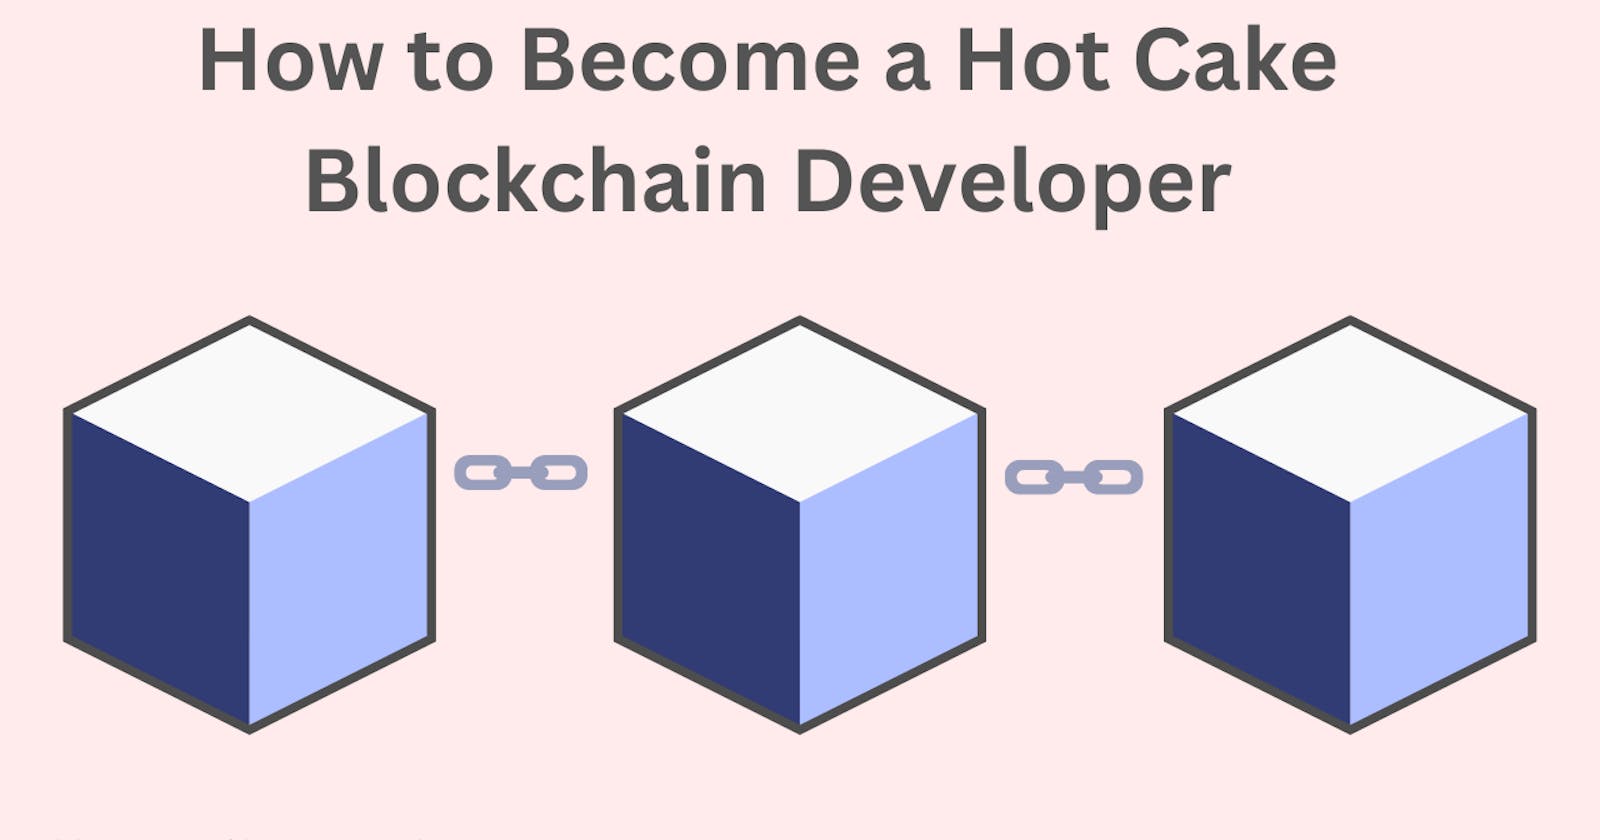 How to Become a Hot Cake Blockchain Developer